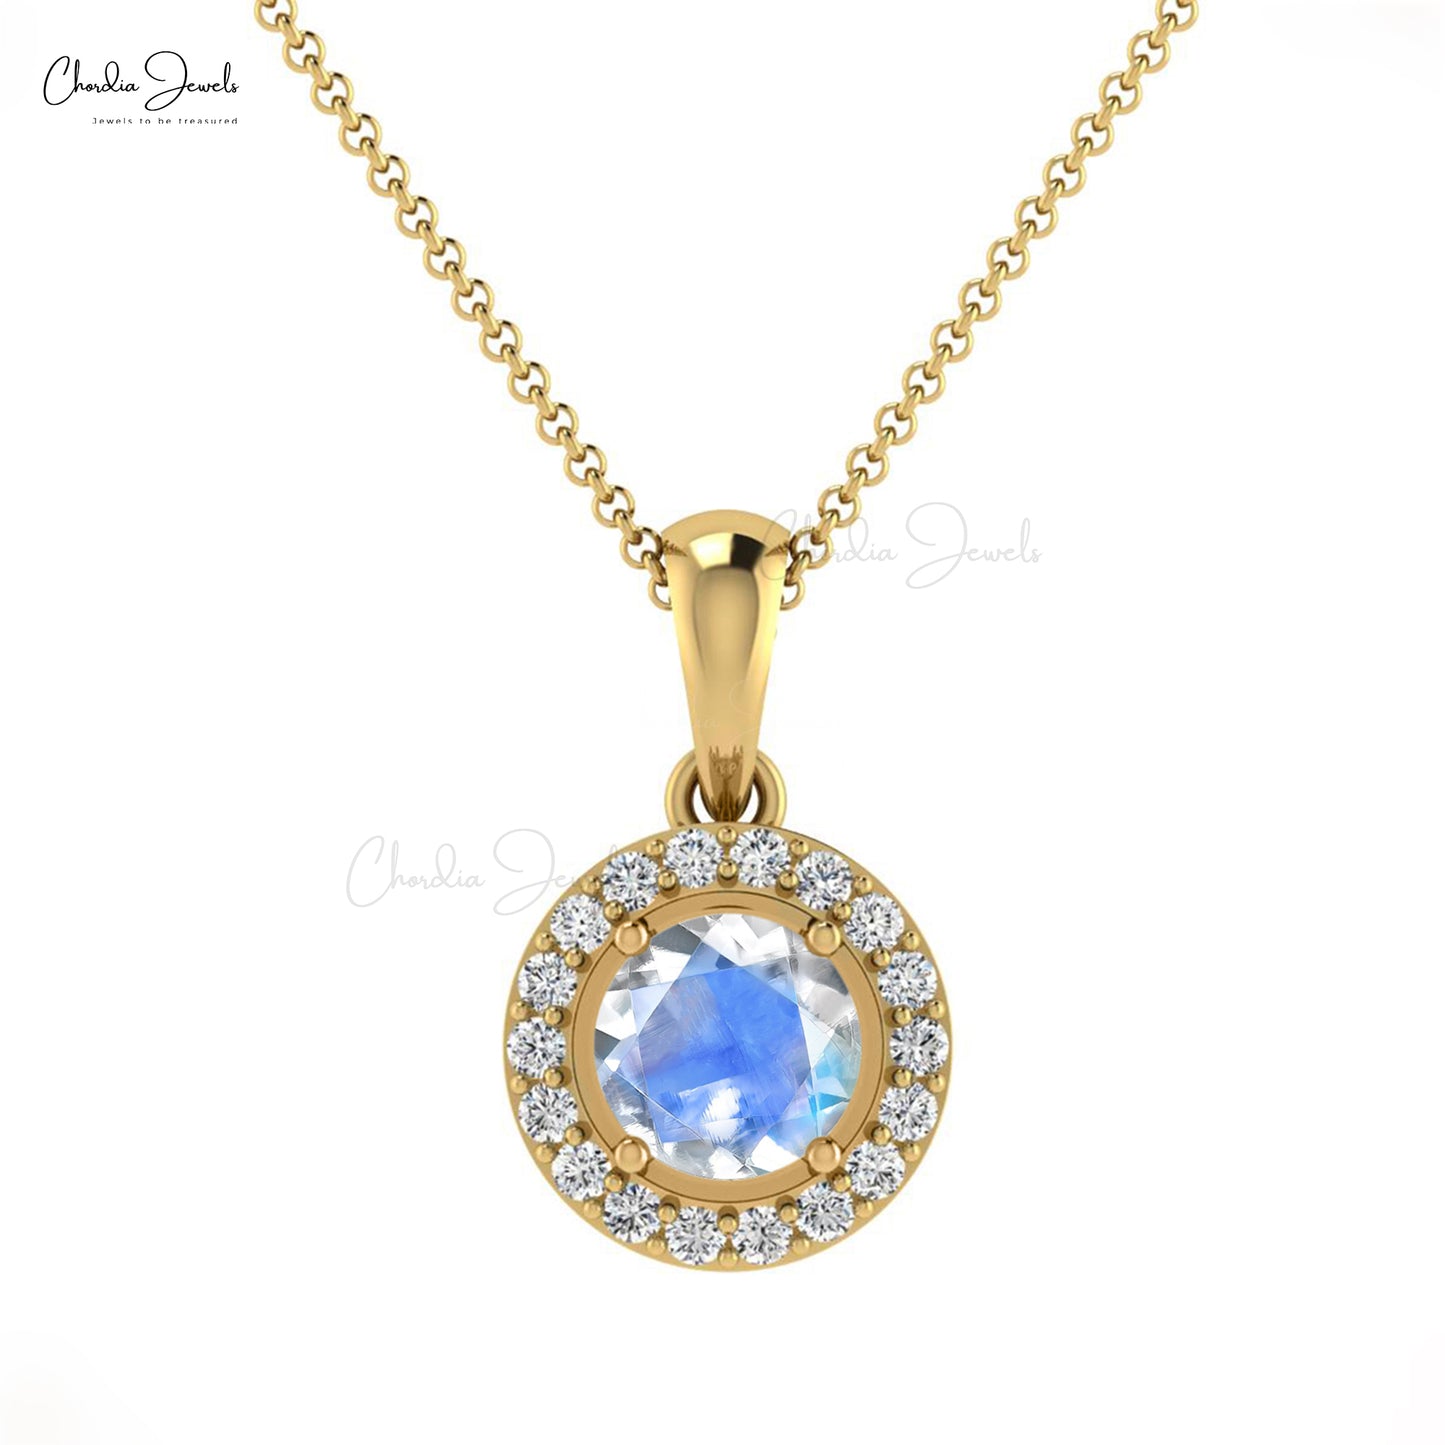 Load image into Gallery viewer, Natural Rainbow Moonstone Halo Pendant 14k Solid Gold Diamond Pendant 4mm Round Solitaire Gemstone Pendant
